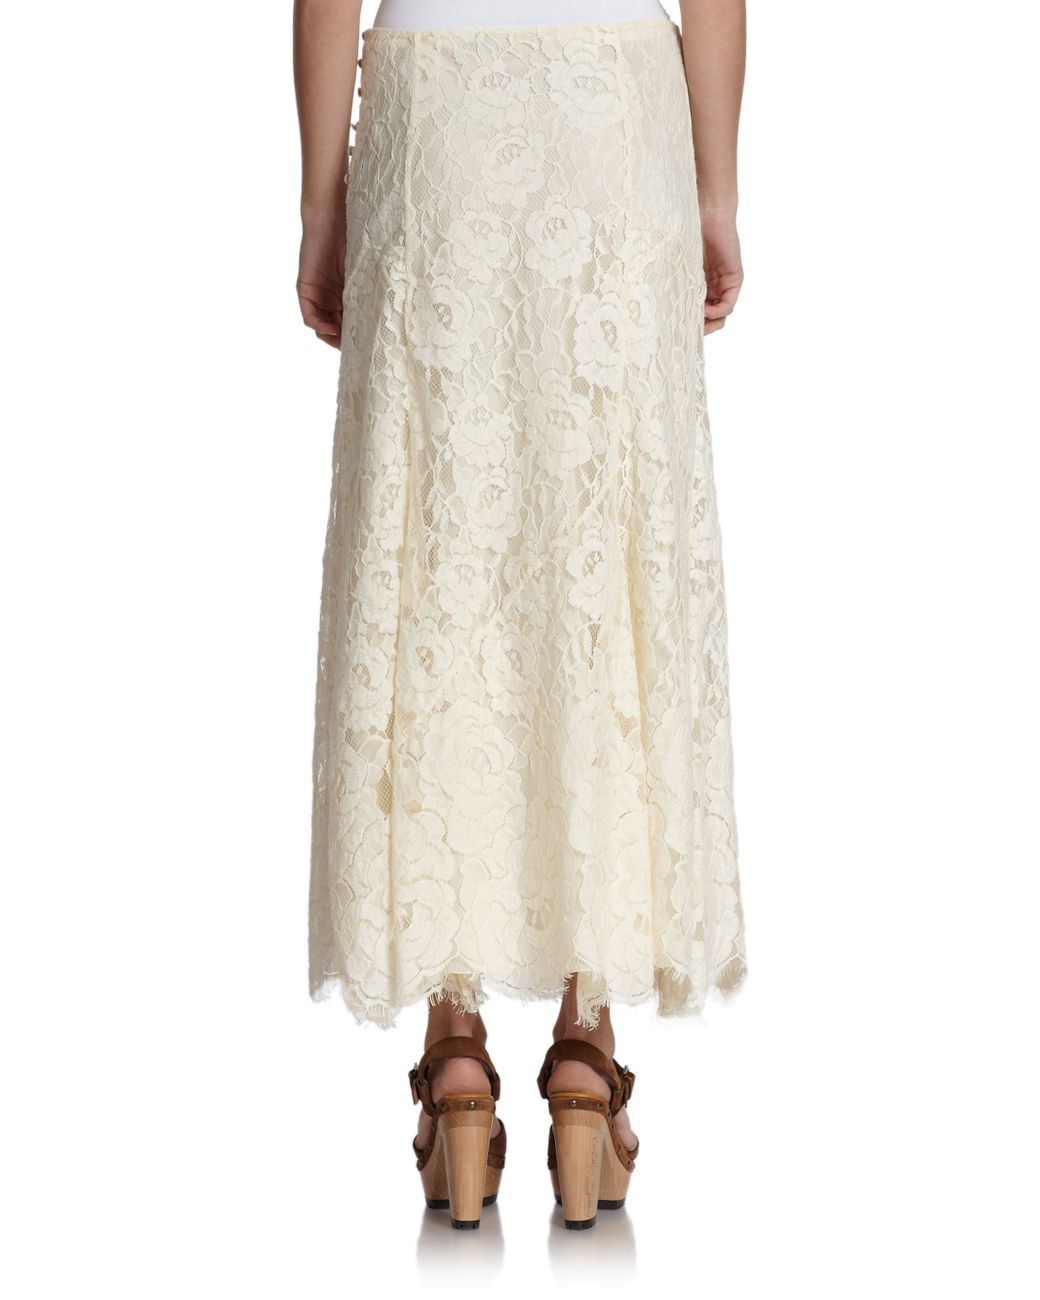 Polo Ralph Lauren Lace Maxi Skirt in Natural | Lyst